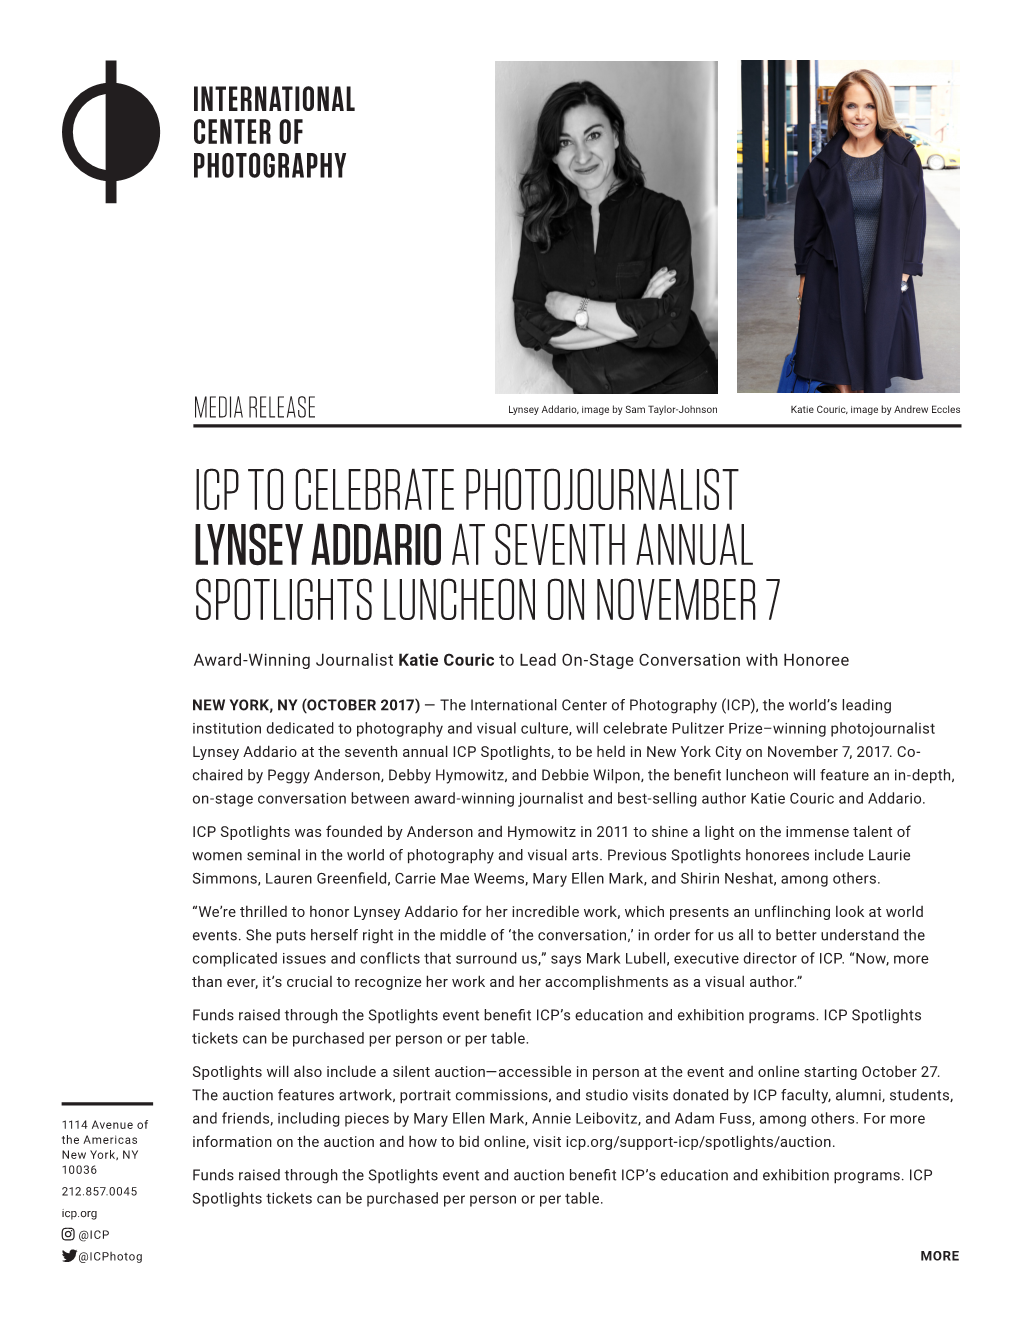 Icp to Celebrate Photojournalist Lynsey Addario at Seventh Annual Spotlights Luncheon on November 7